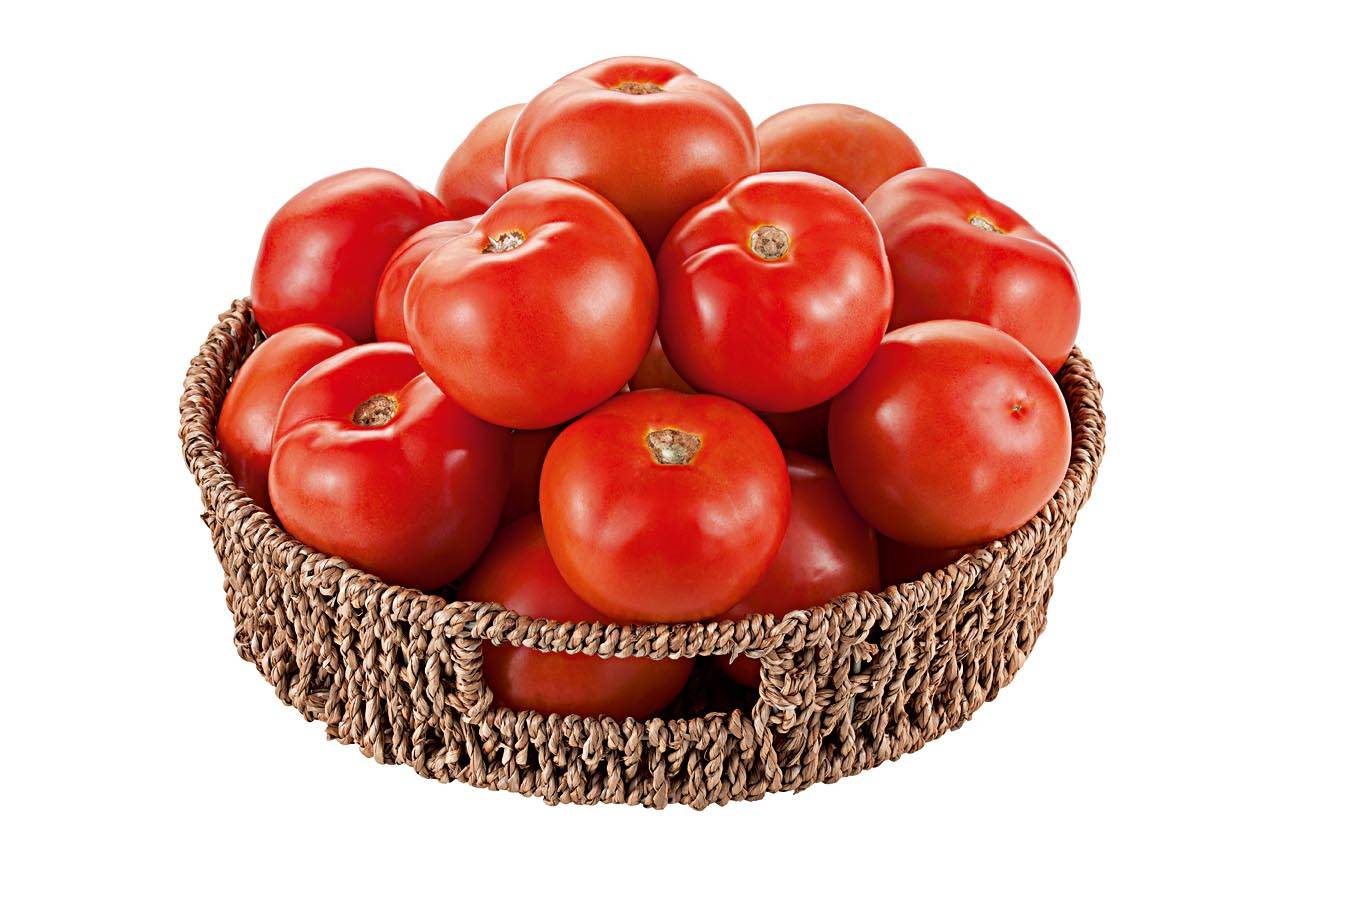 Tomate (unidade: 250 g aprox)